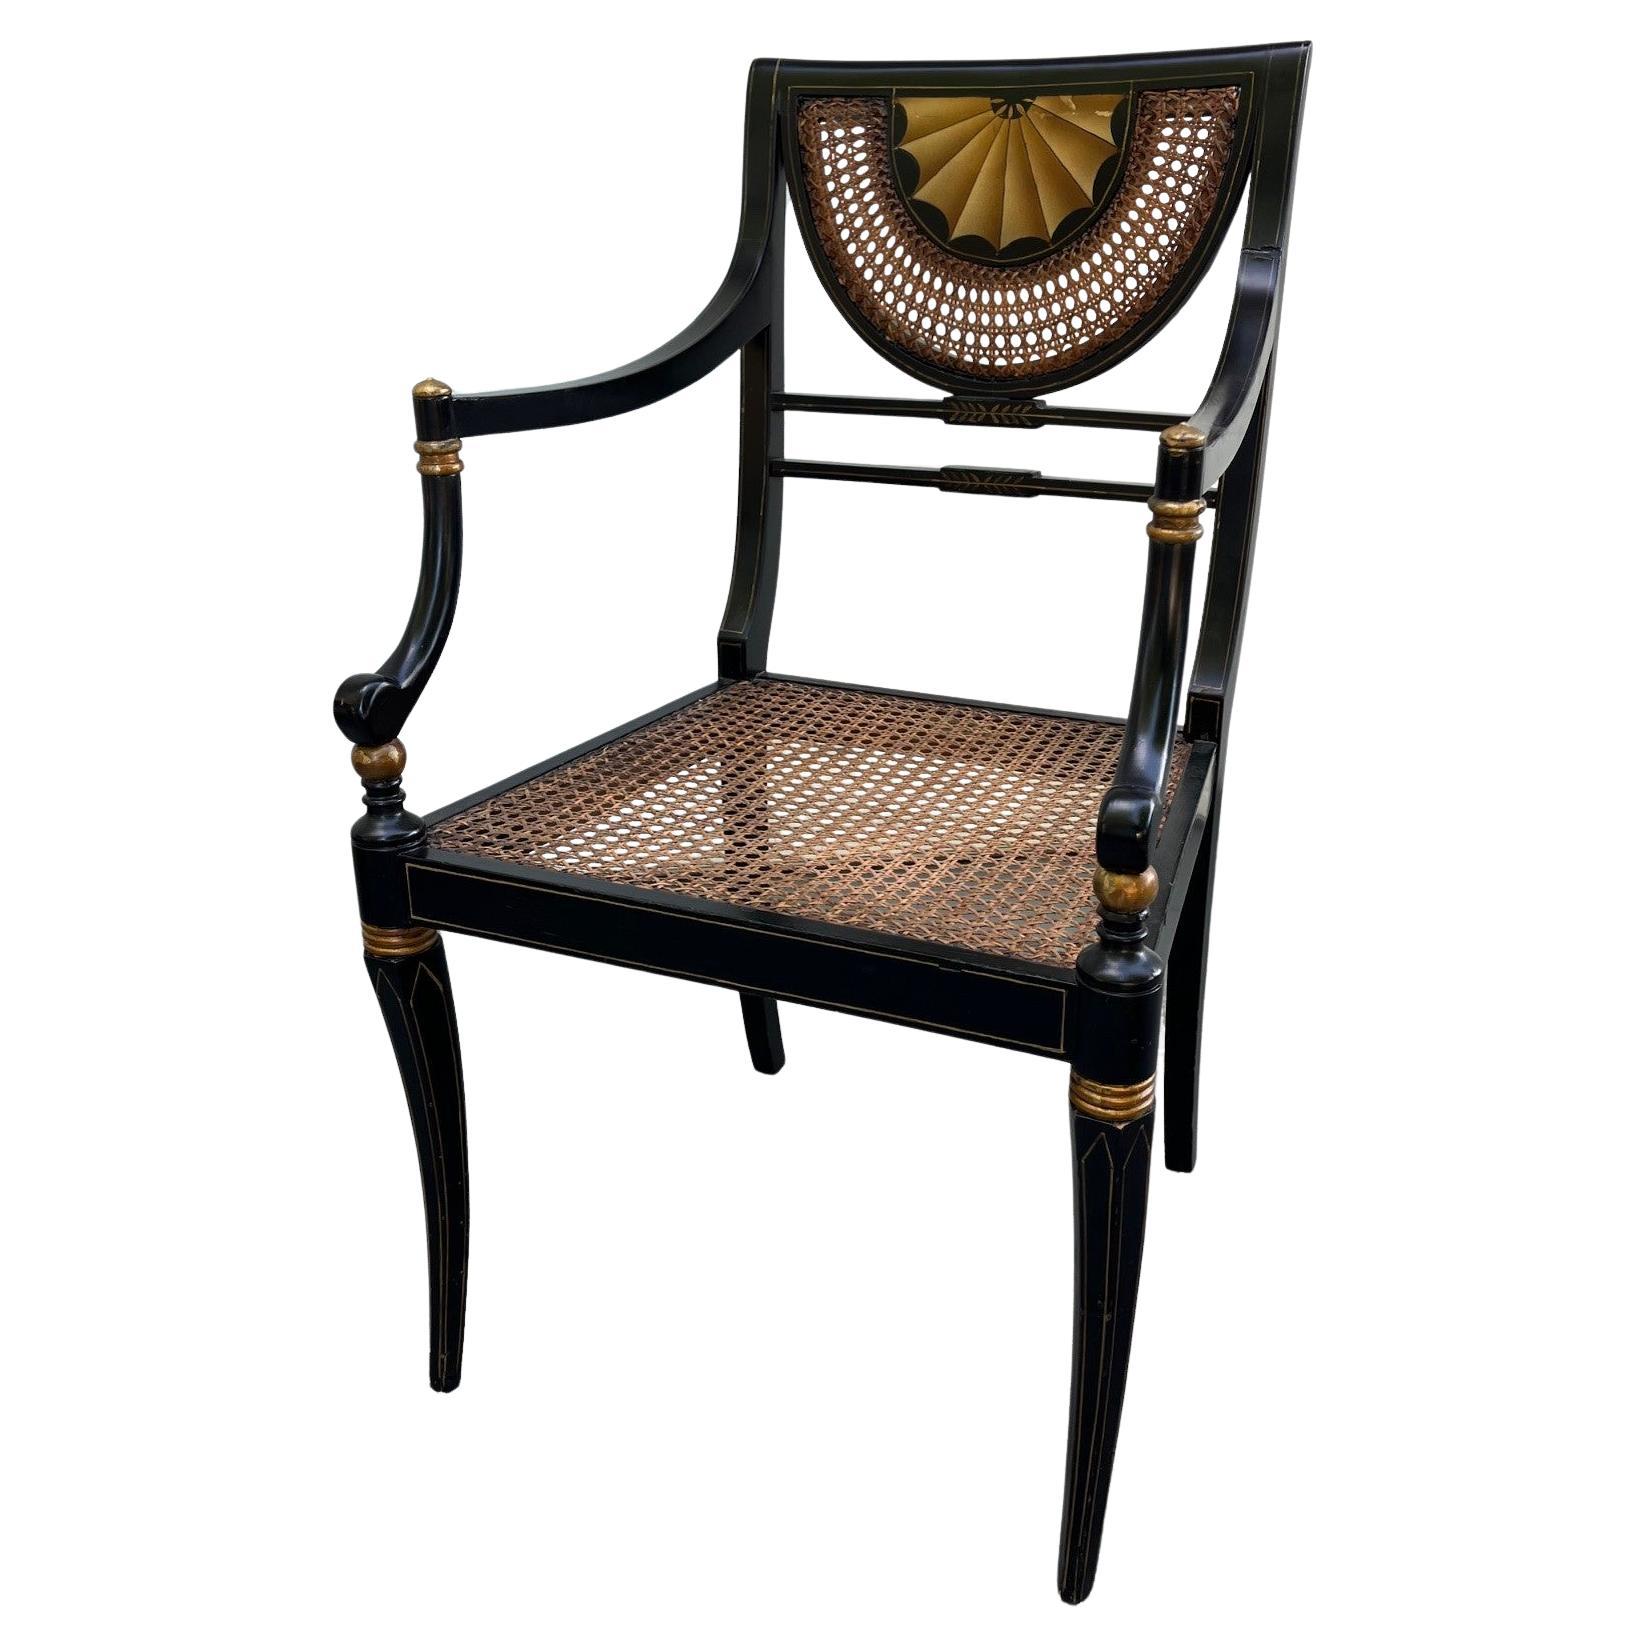 Vintage Regency Style Ebonized Armchair with Cane Seat. For Sale